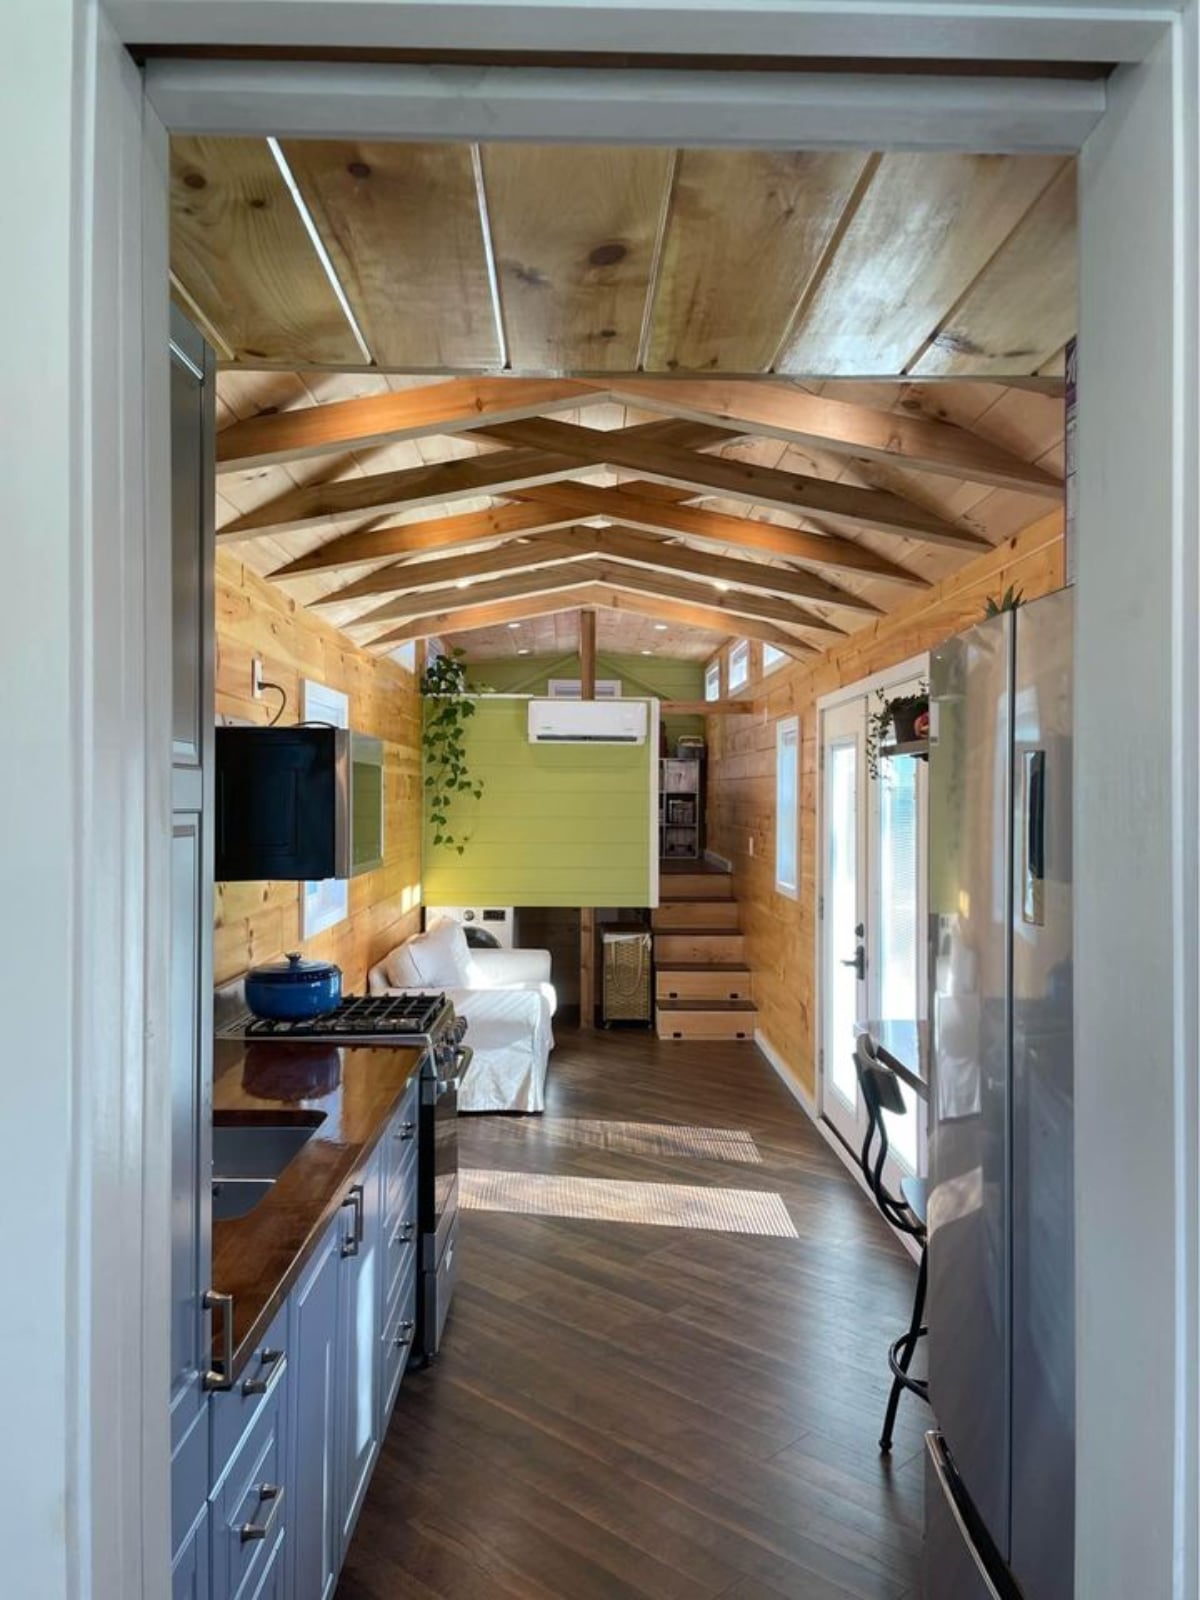 Well organised and stunning Interior of 40' Tiny House from inside